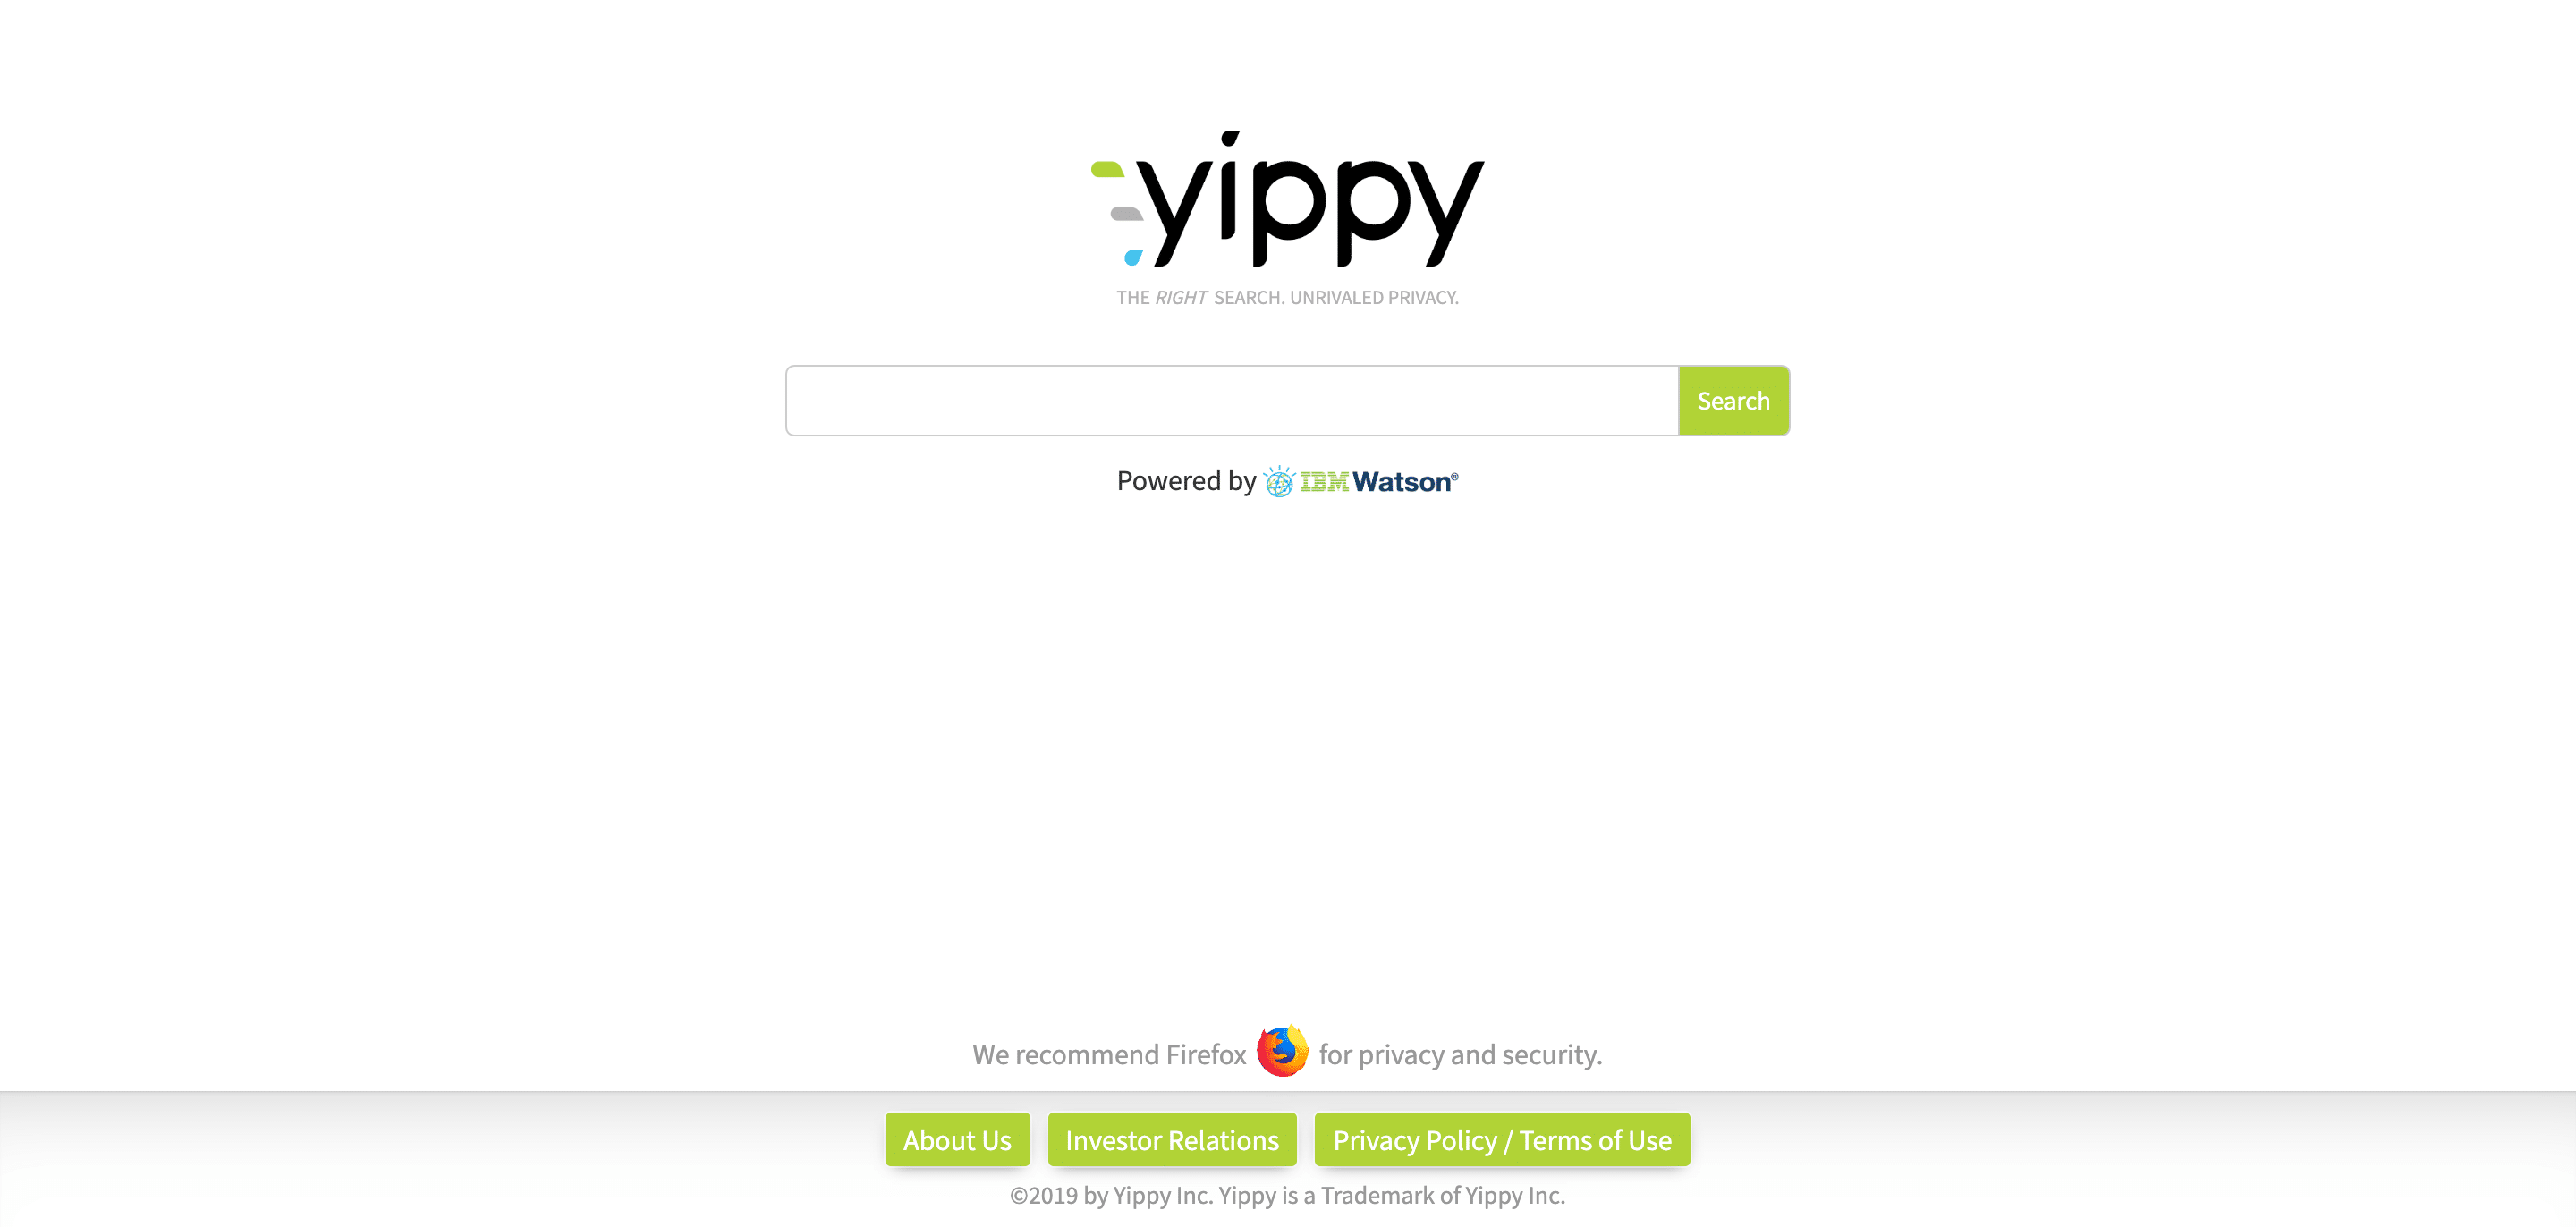 Yippy search engine